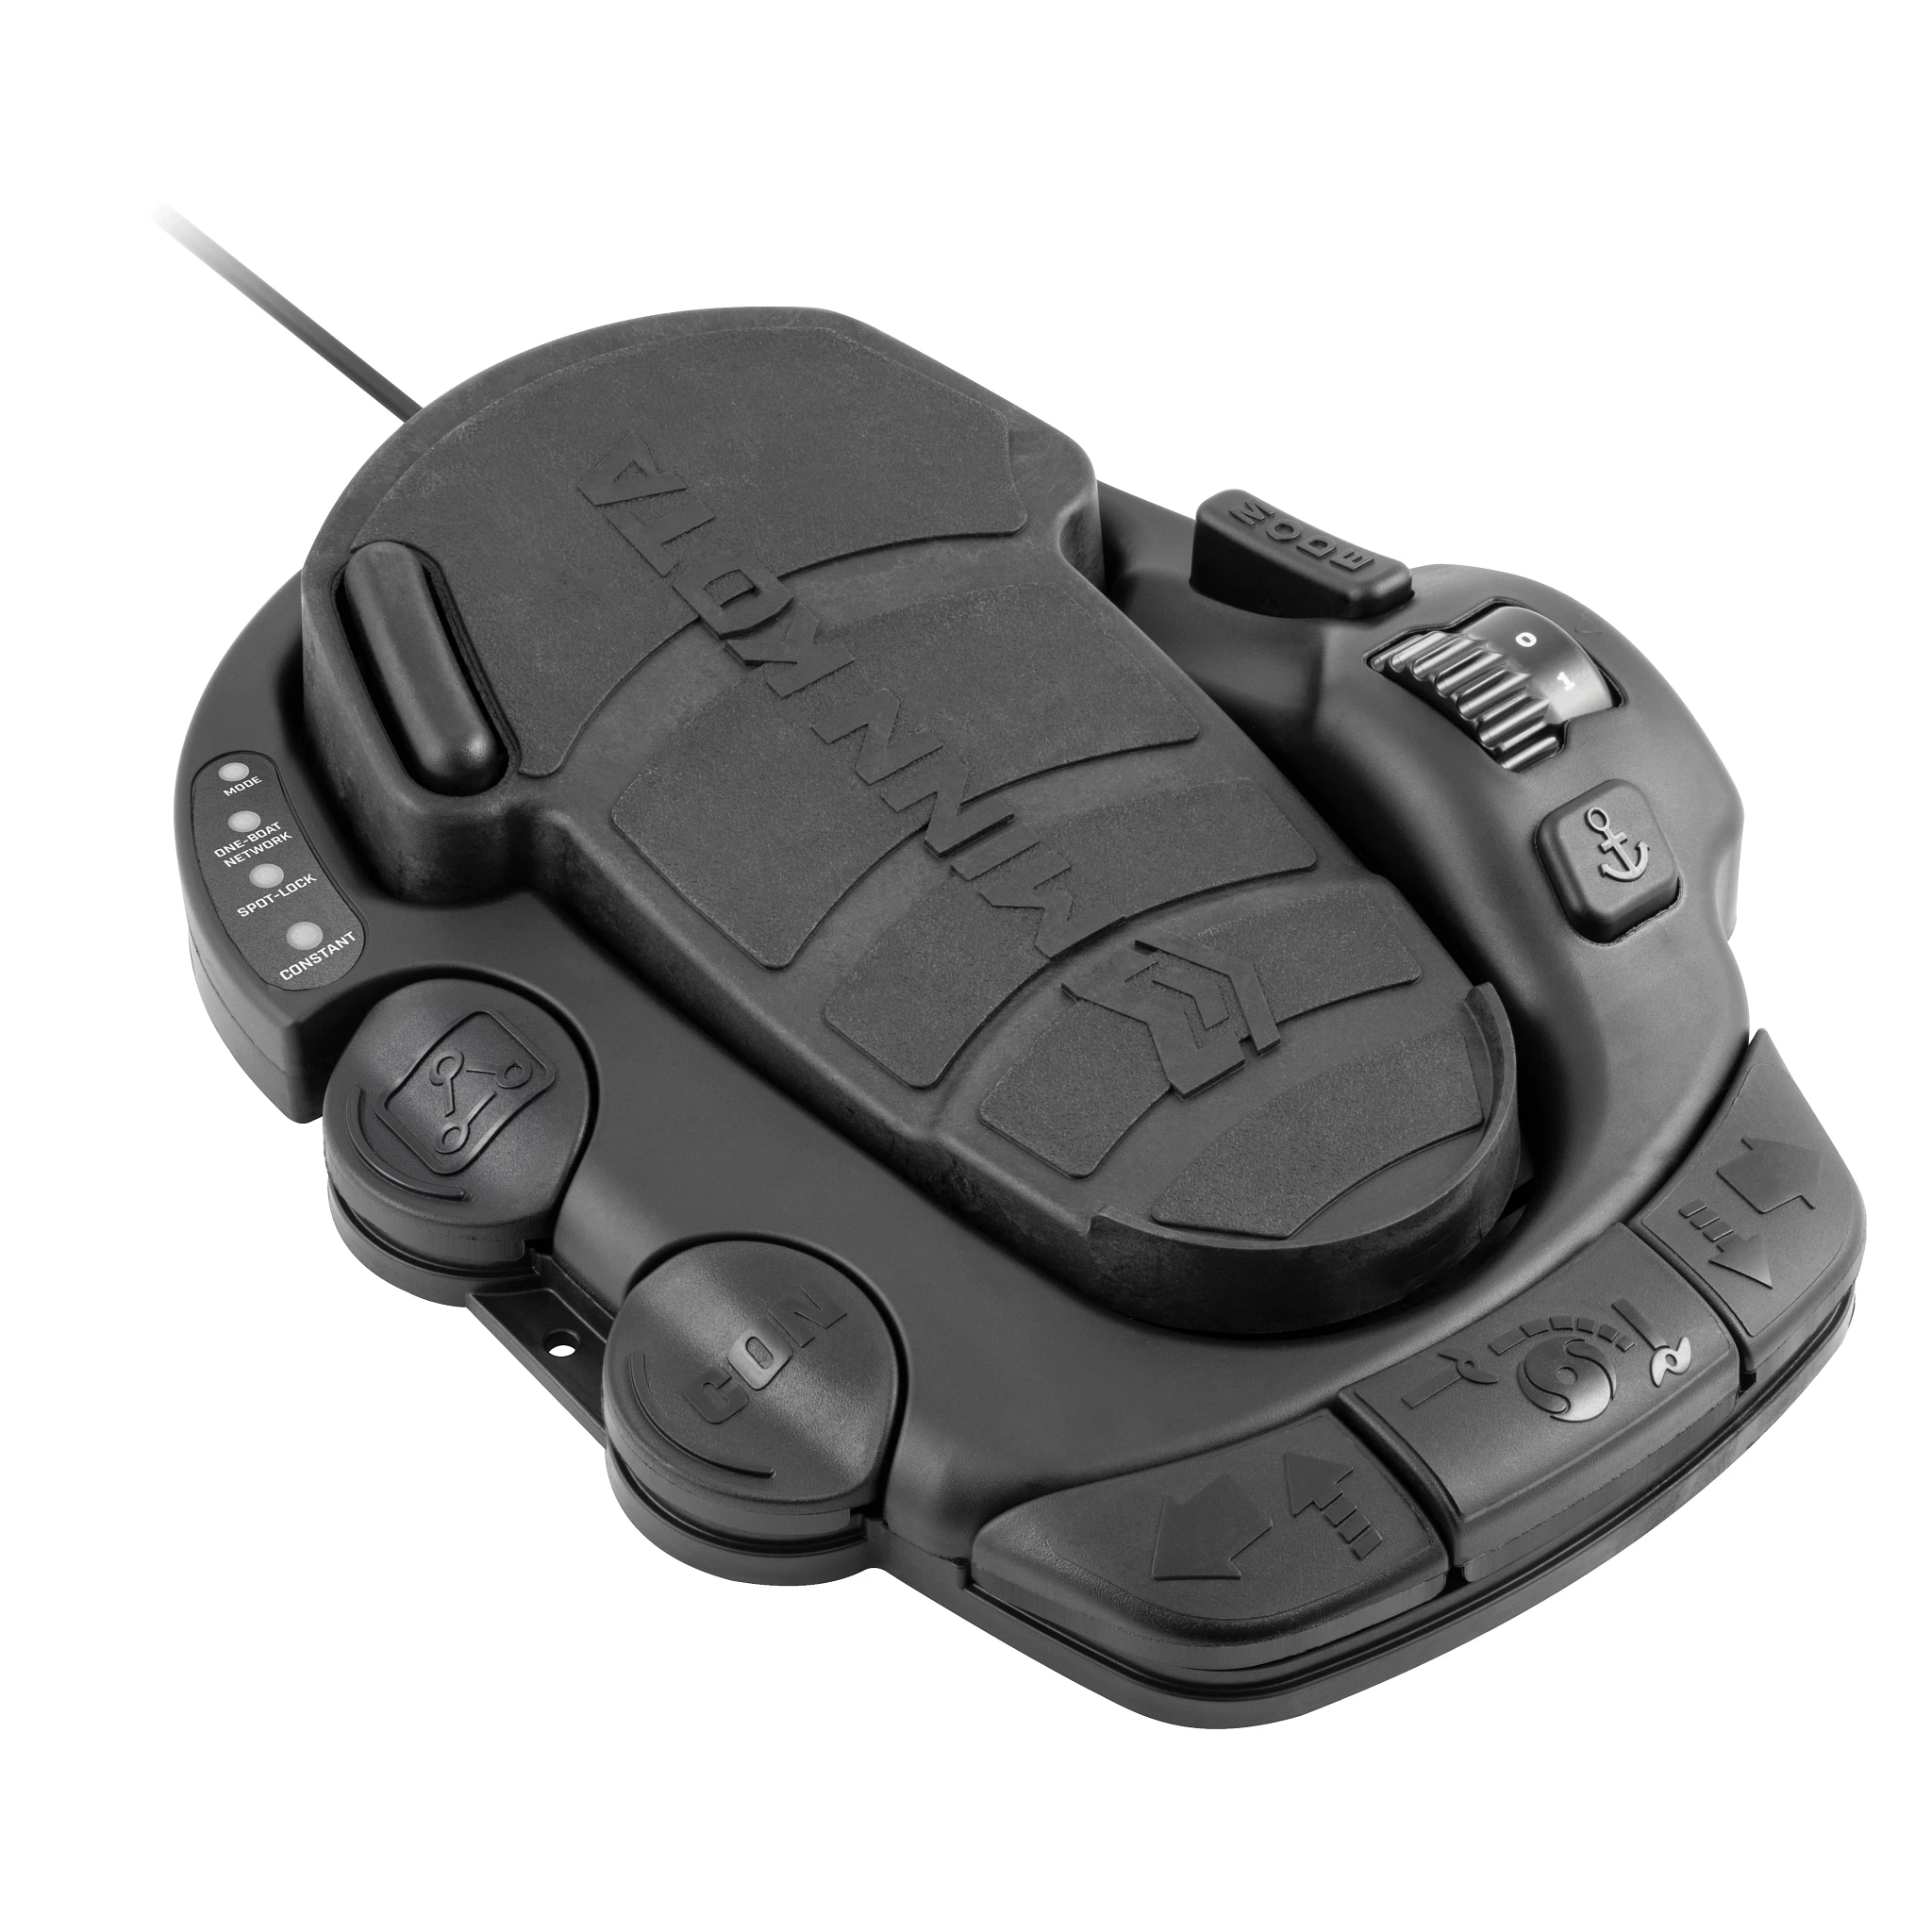 Ulterra / Riptide Instinct QUEST Foot Pedal shown from a three-quarter view